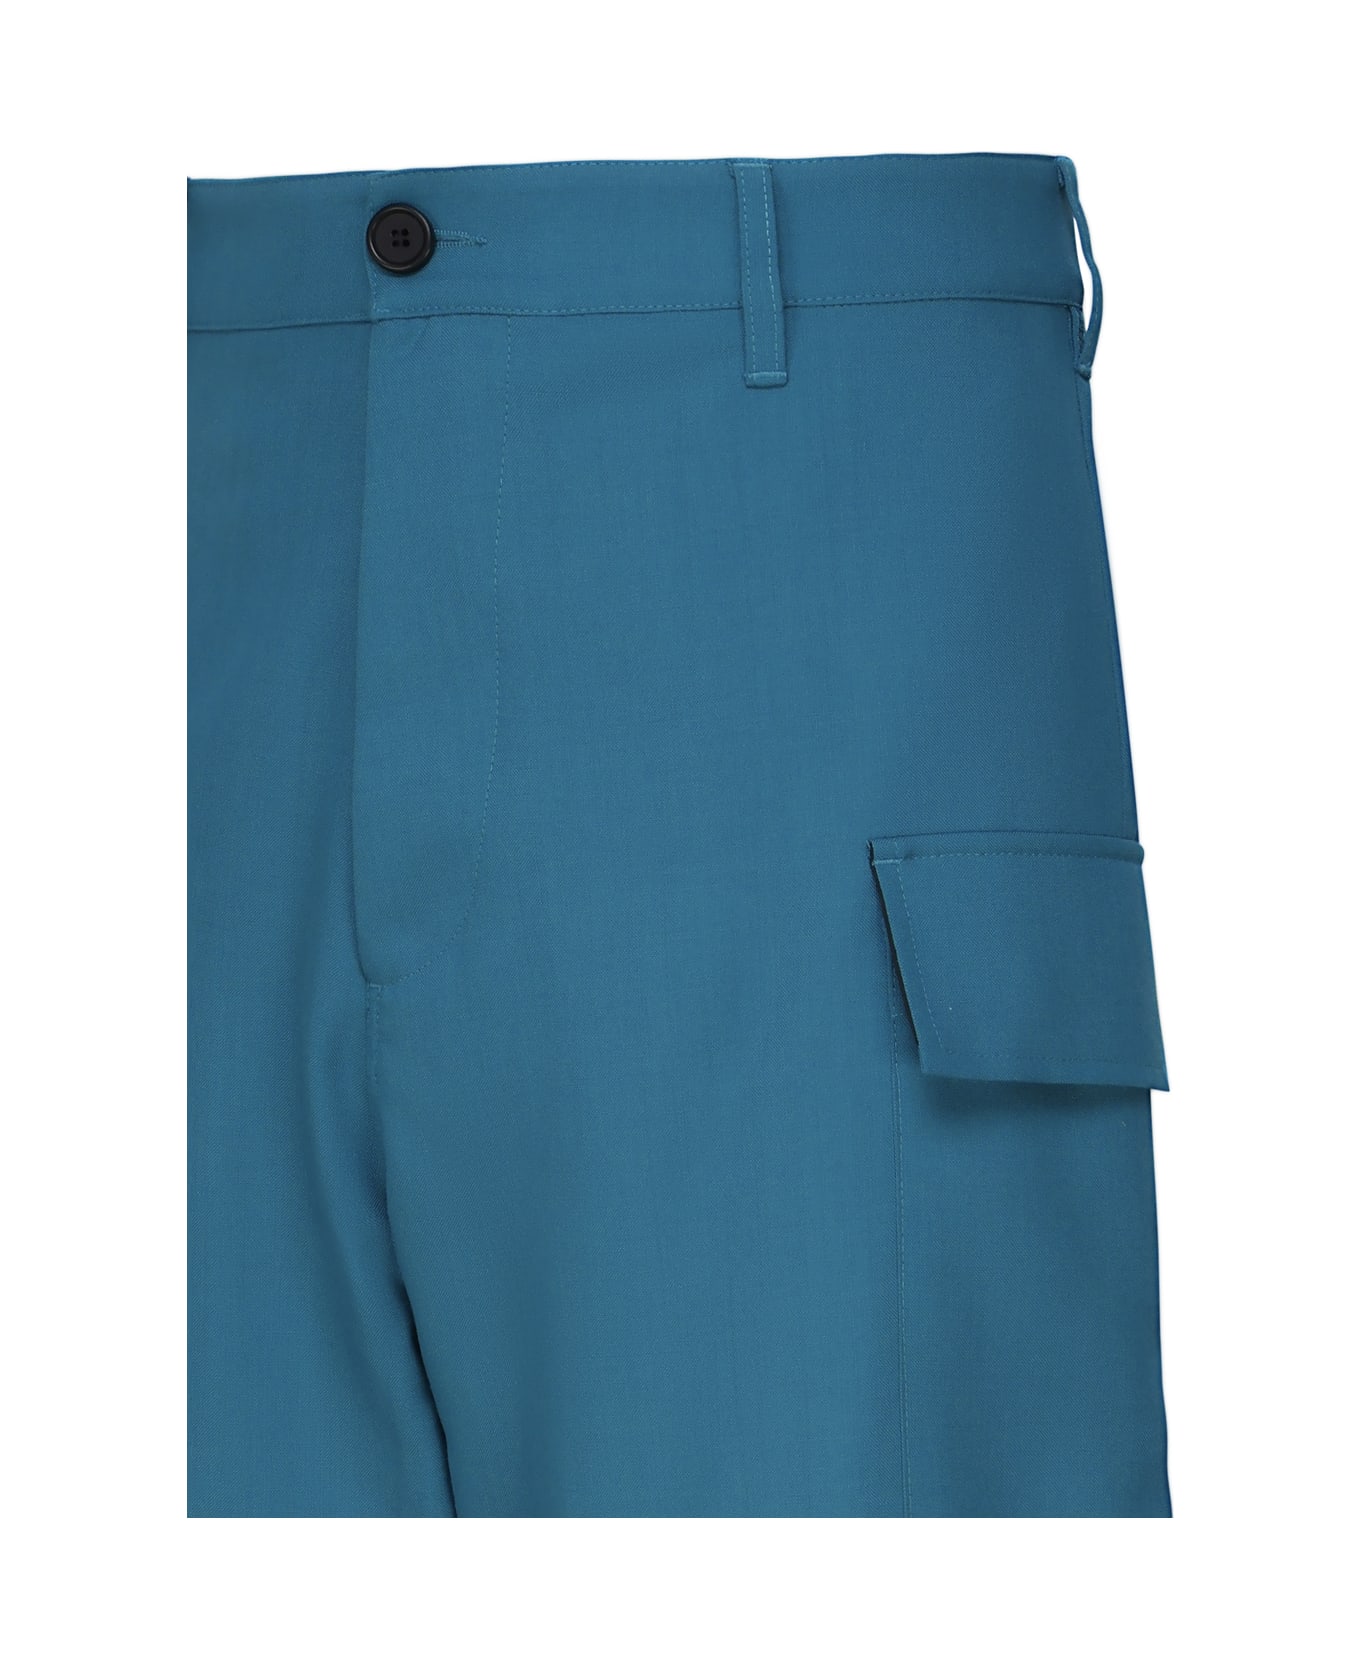 Marni Cool Wool Trousers With Cargo Pockets - Petrol blue ボトムス